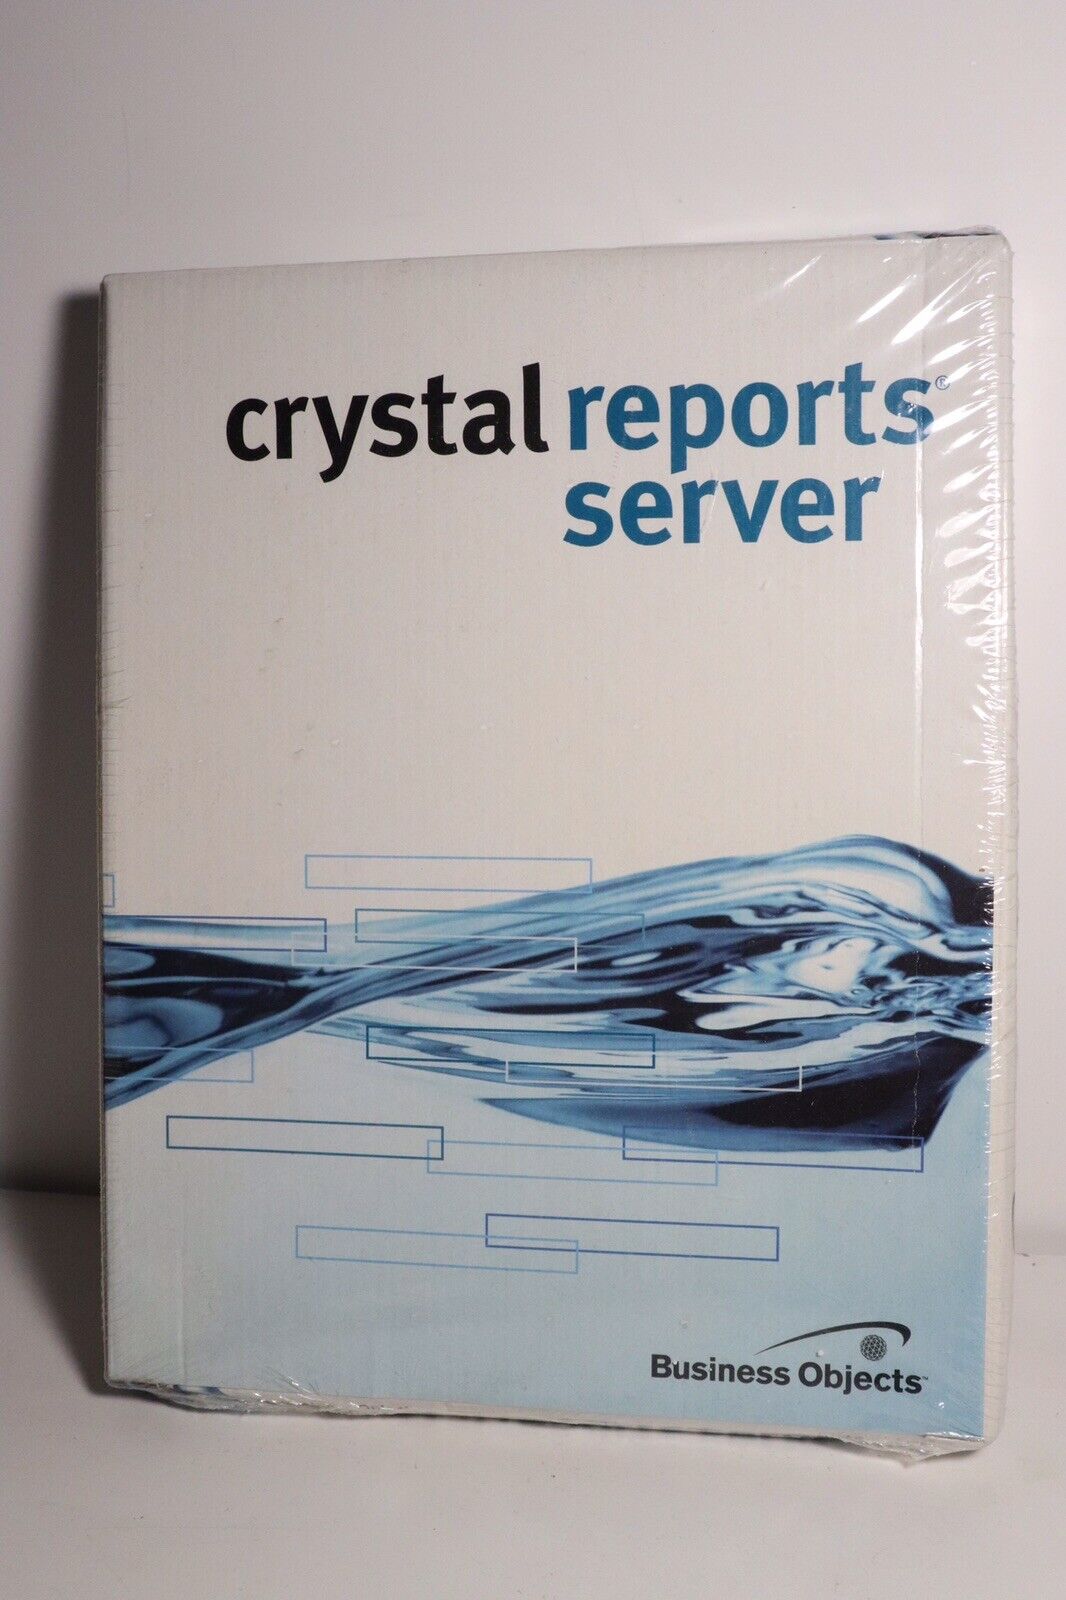 Crystal Reports Server Xi R2 - Brand New Factory Sealed